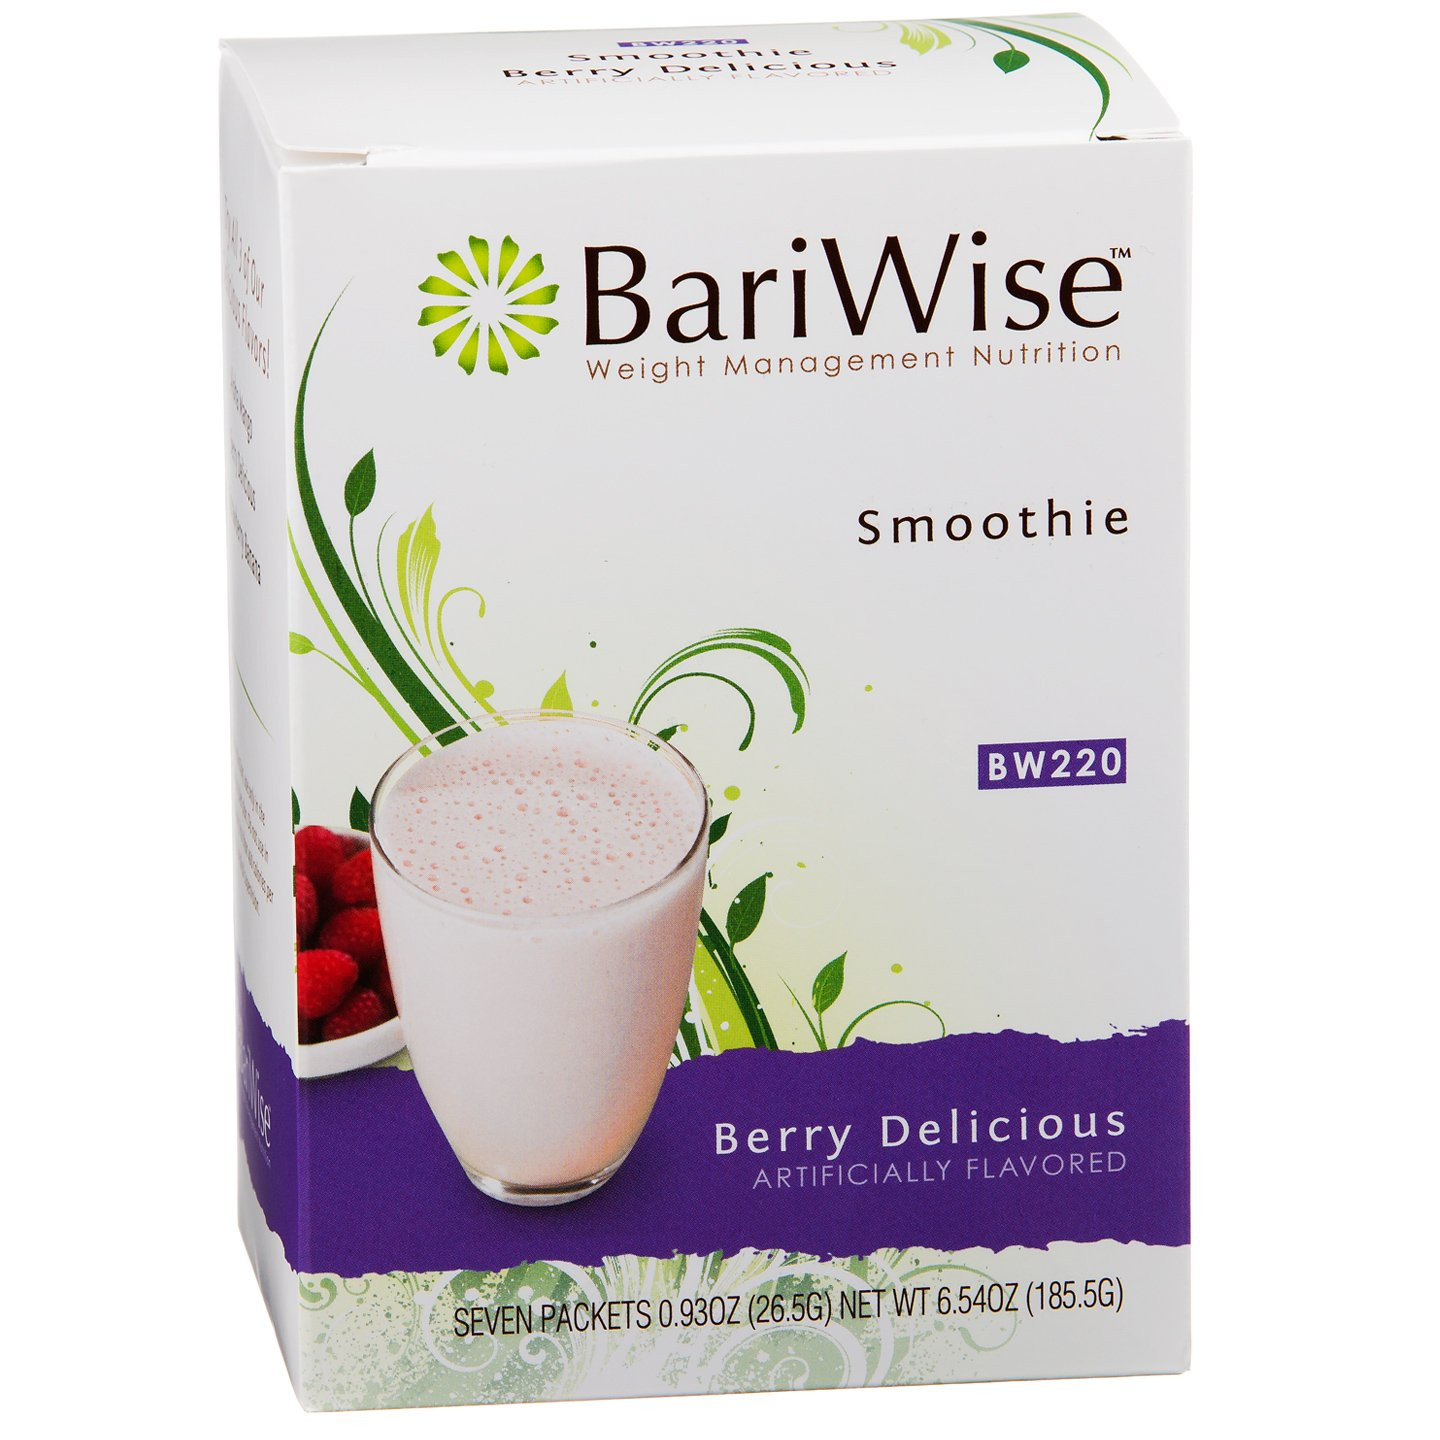 Low Carb Low Calorie Smoothies
 Amazon BariWise High Protein Fruit Smoothie Low Carb